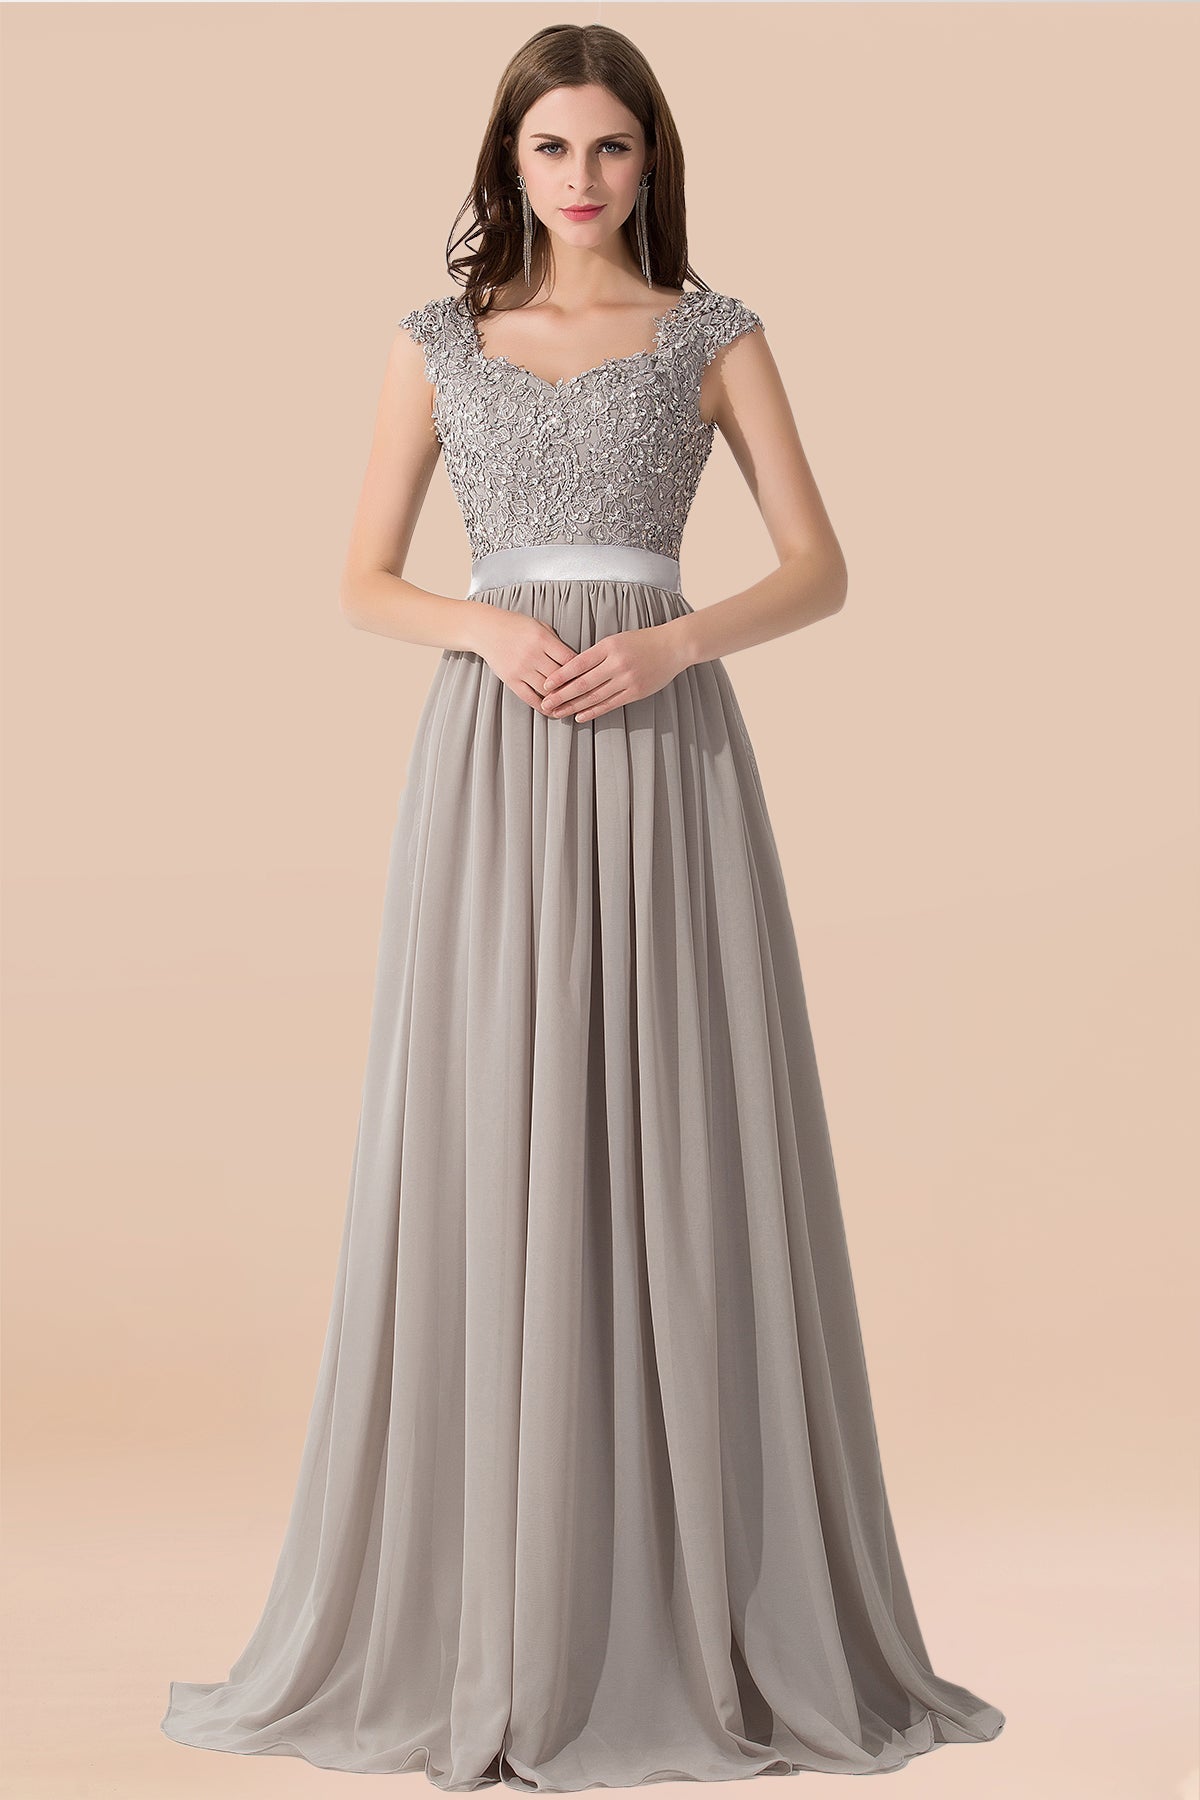 Vintage Silver Sleeveless Long Bridesmaid Dress With Appliques-27dress